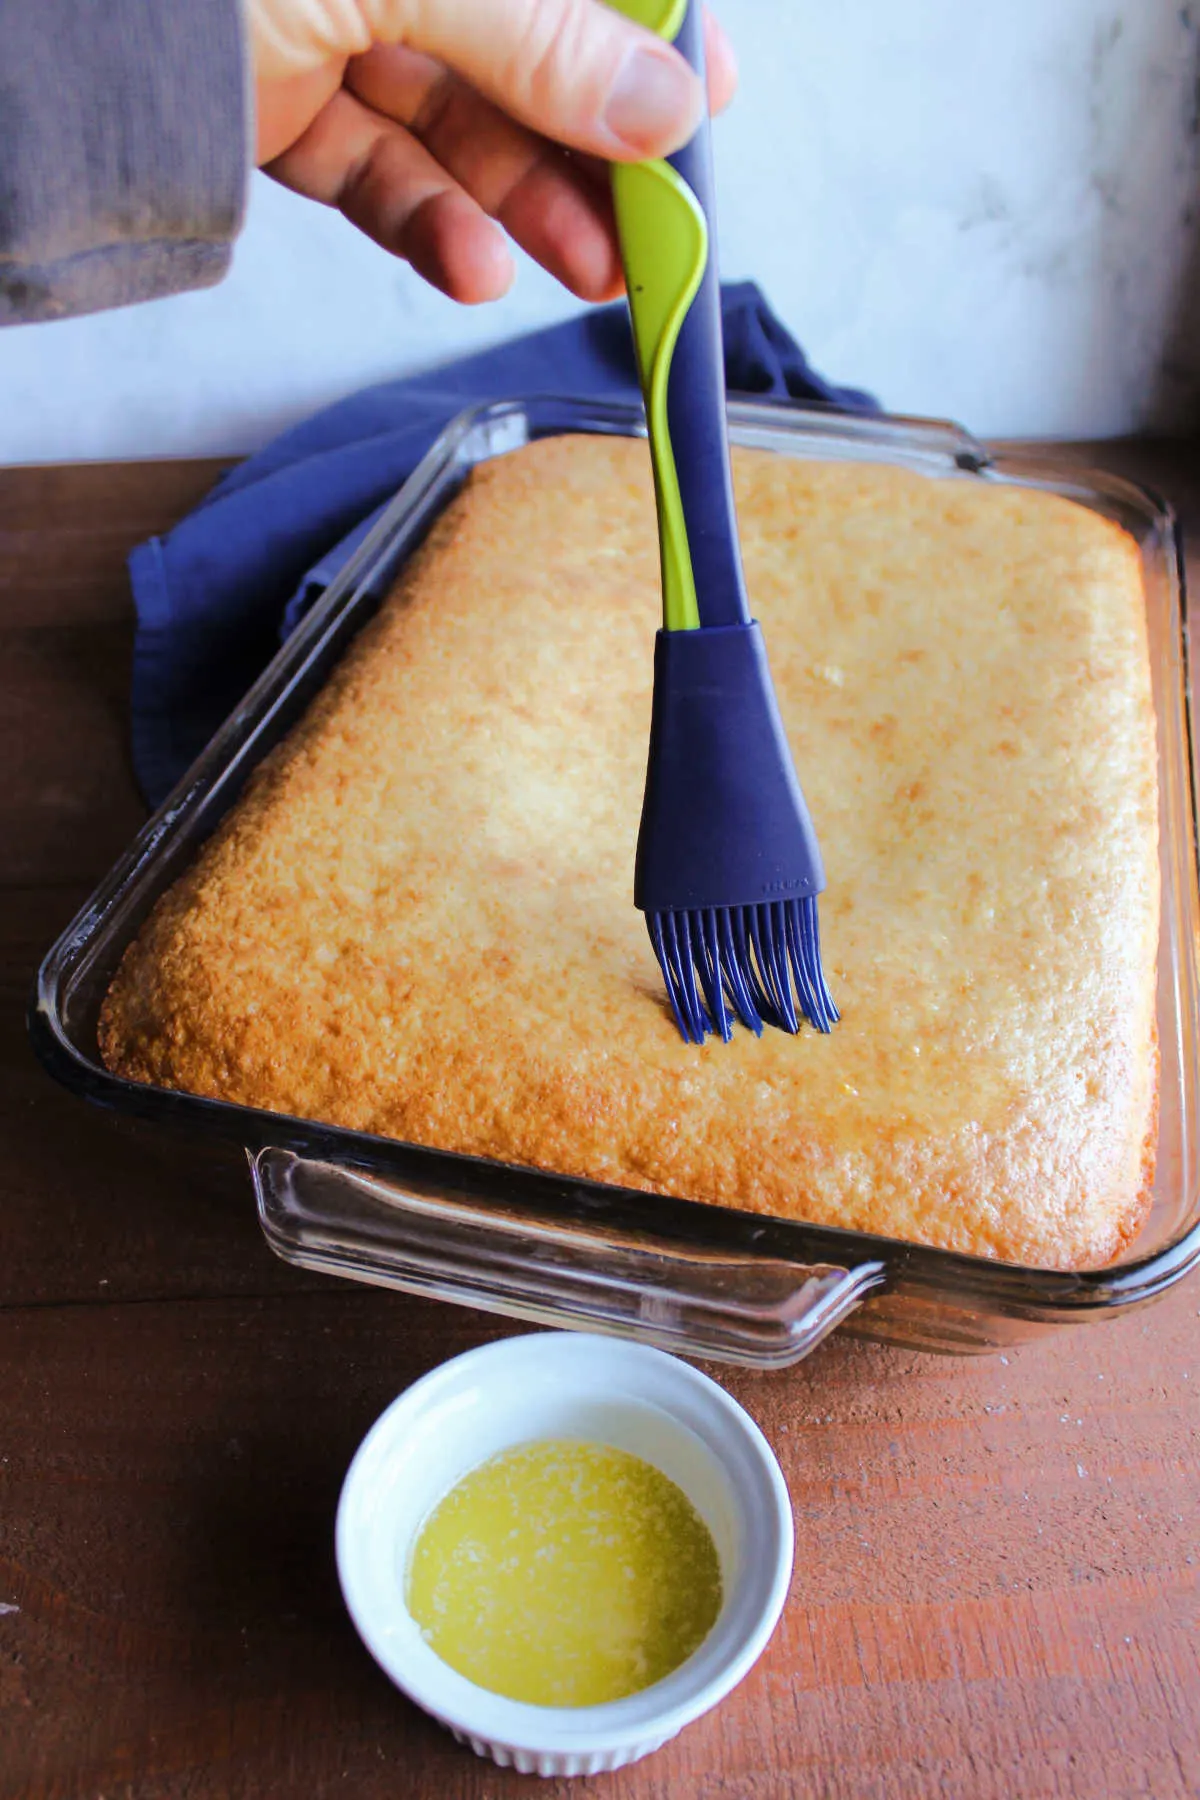 Brushing melted butter over golden brown topped cornbread fresh from the oven.